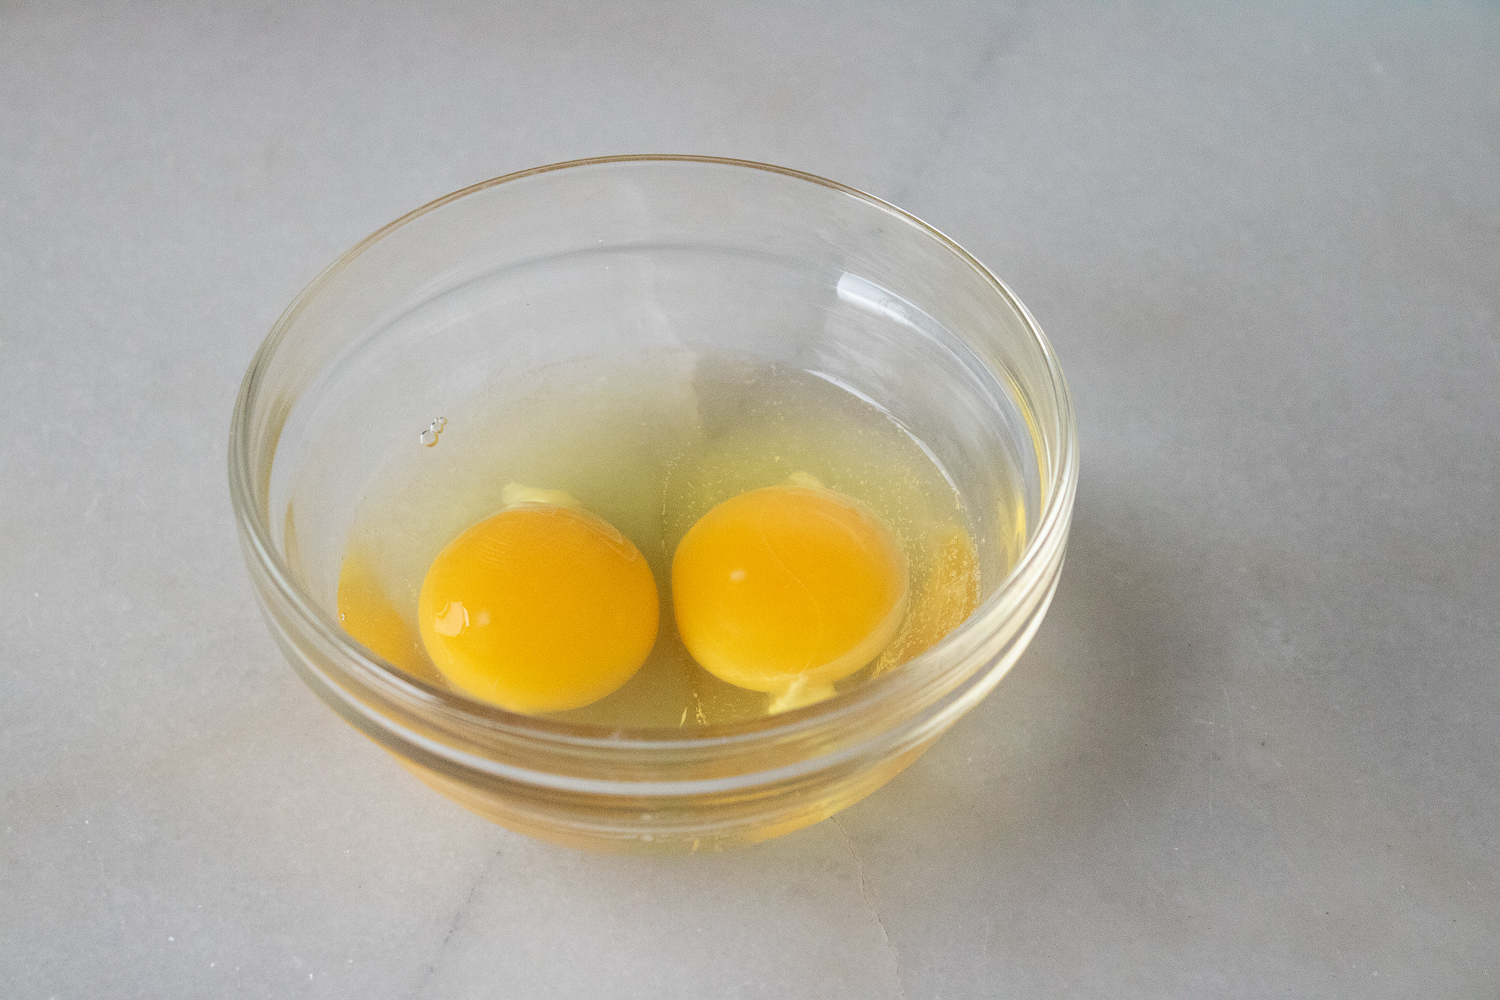 The whole eggs in a glass bowl.